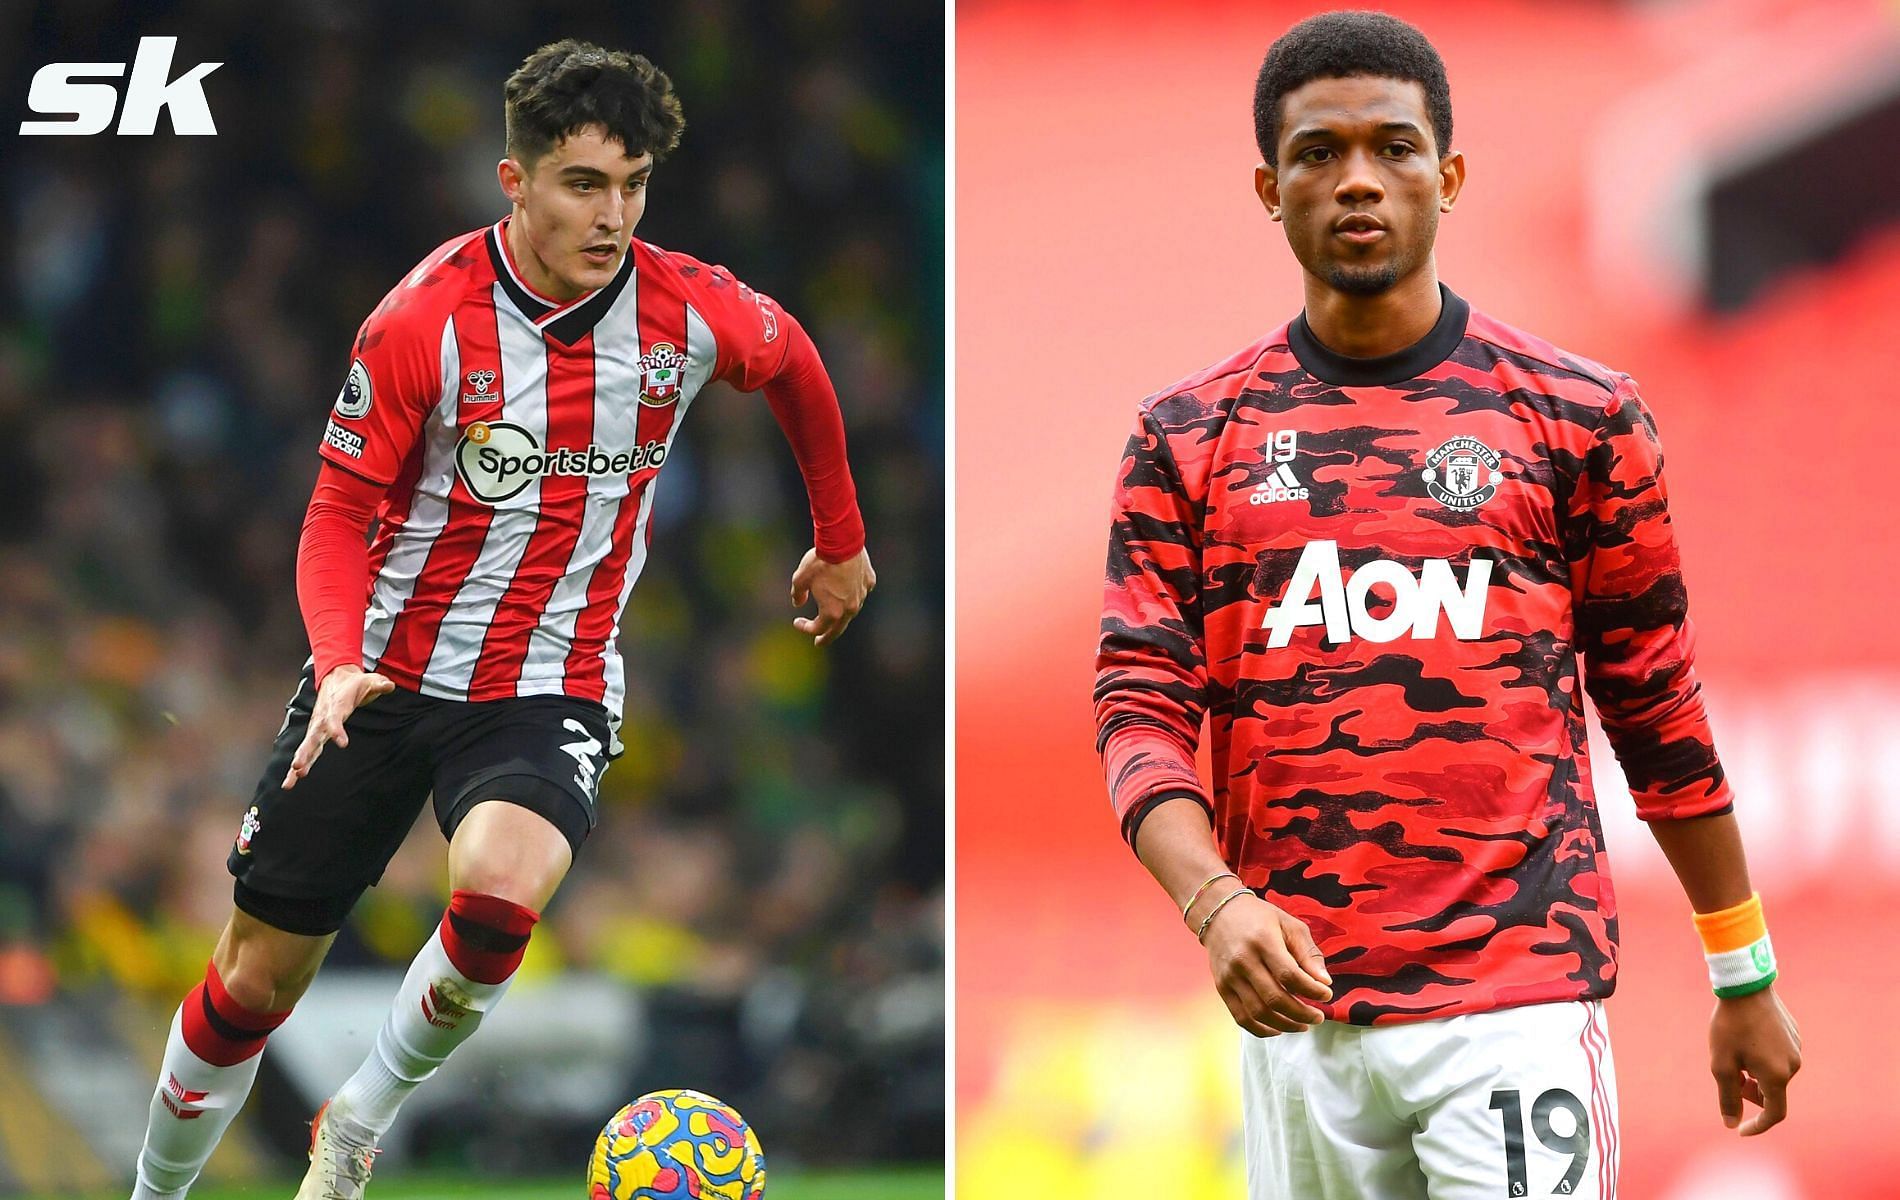 Who is the best U-20 talent in the Premier League?